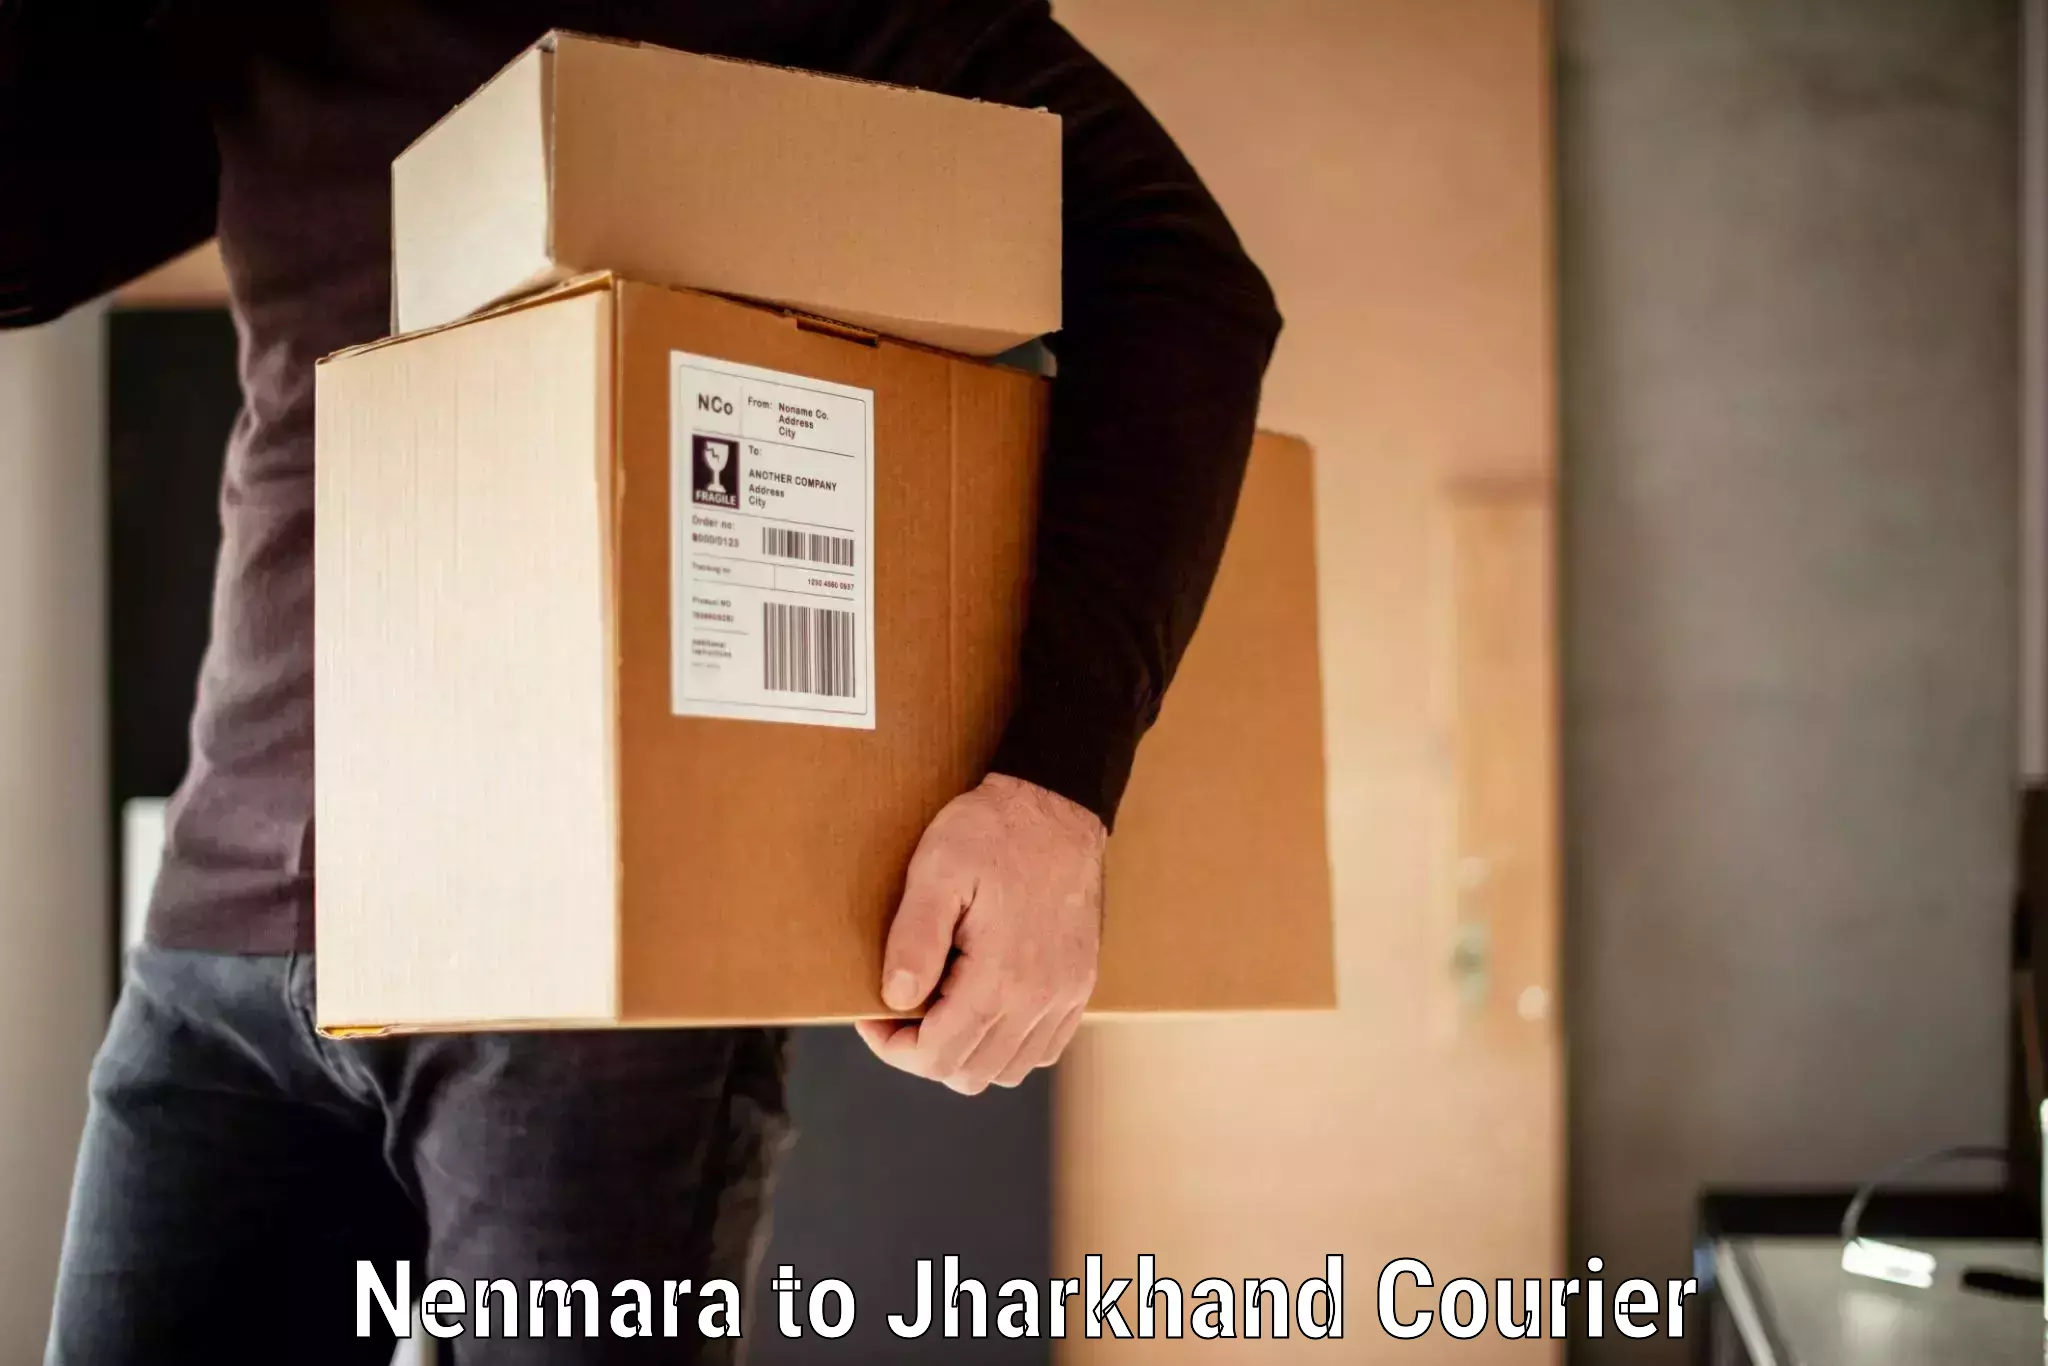 Personal effects shipping in Nenmara to Jharkhand